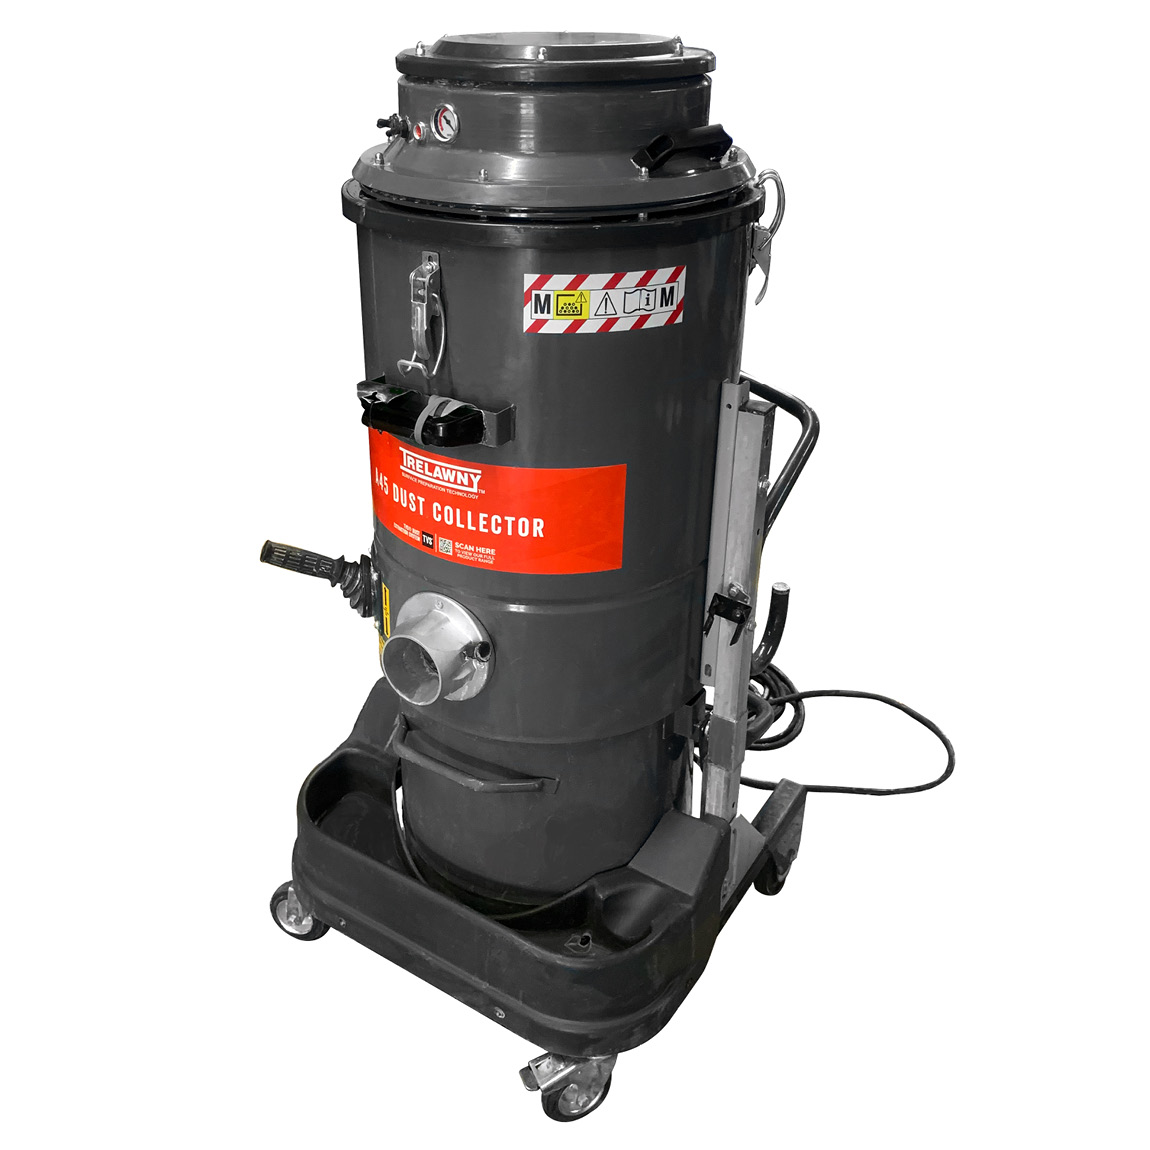 Dust collector for industrial use, the A45 Trelawny model can be used with concrete floor grinders and expansion joint floor saws to ensure a dust free environment. Available to hire or purchase from Speedcrete, United Kingdom.